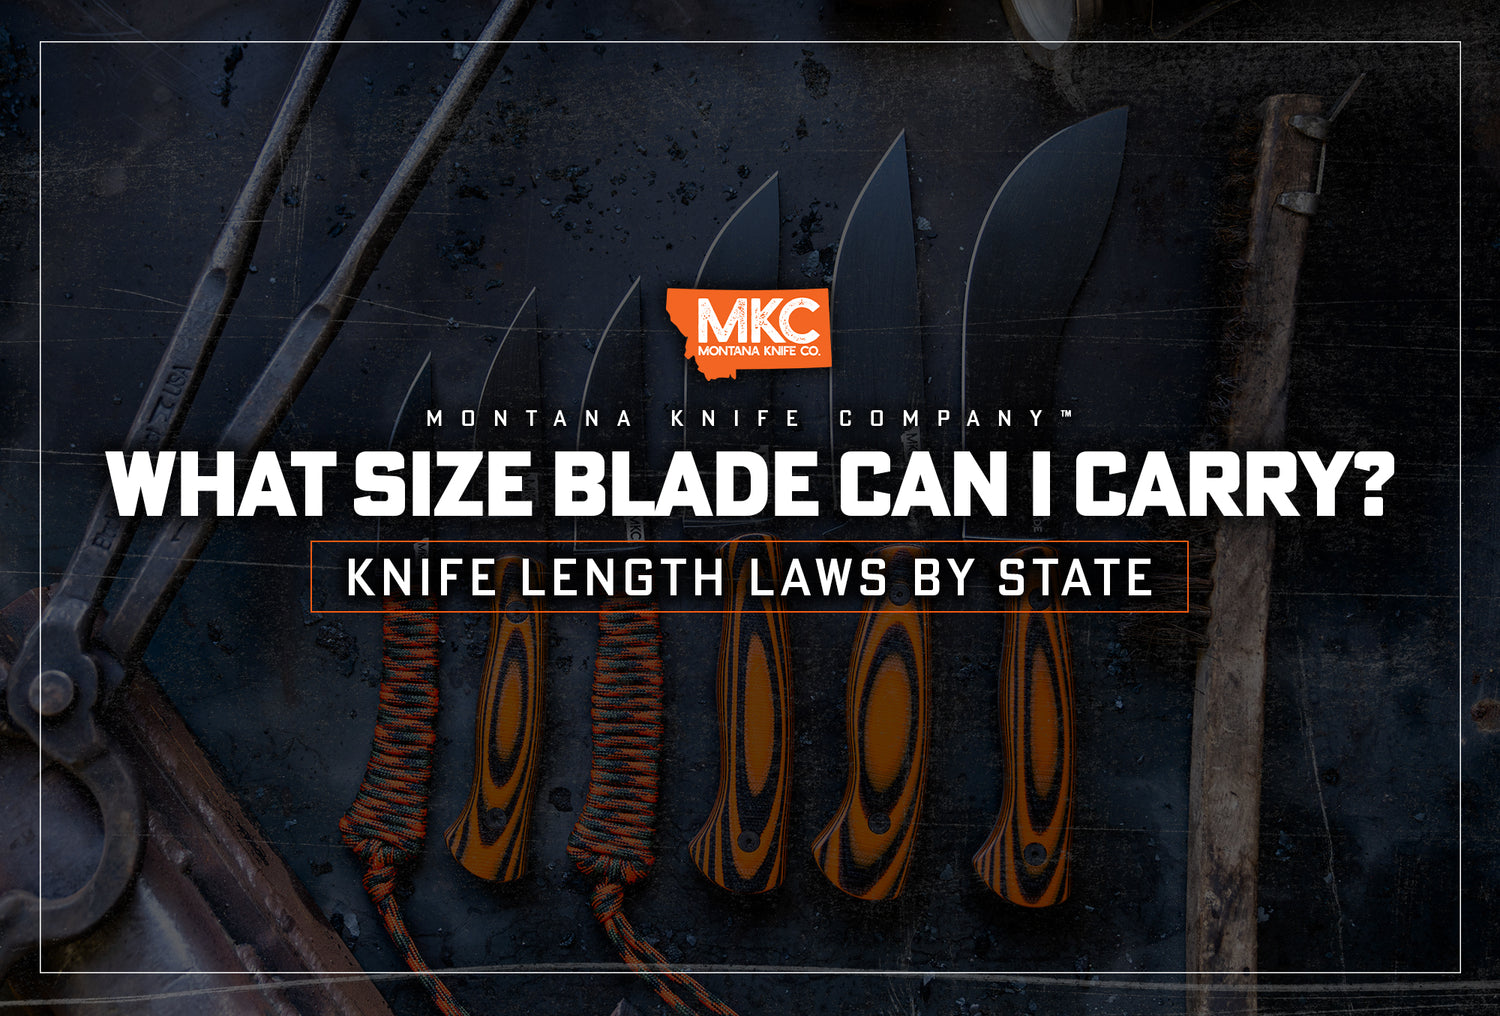 Six MKC knives lie in a row from shortest to longest on a dark table, representing differing knife length laws by state. 